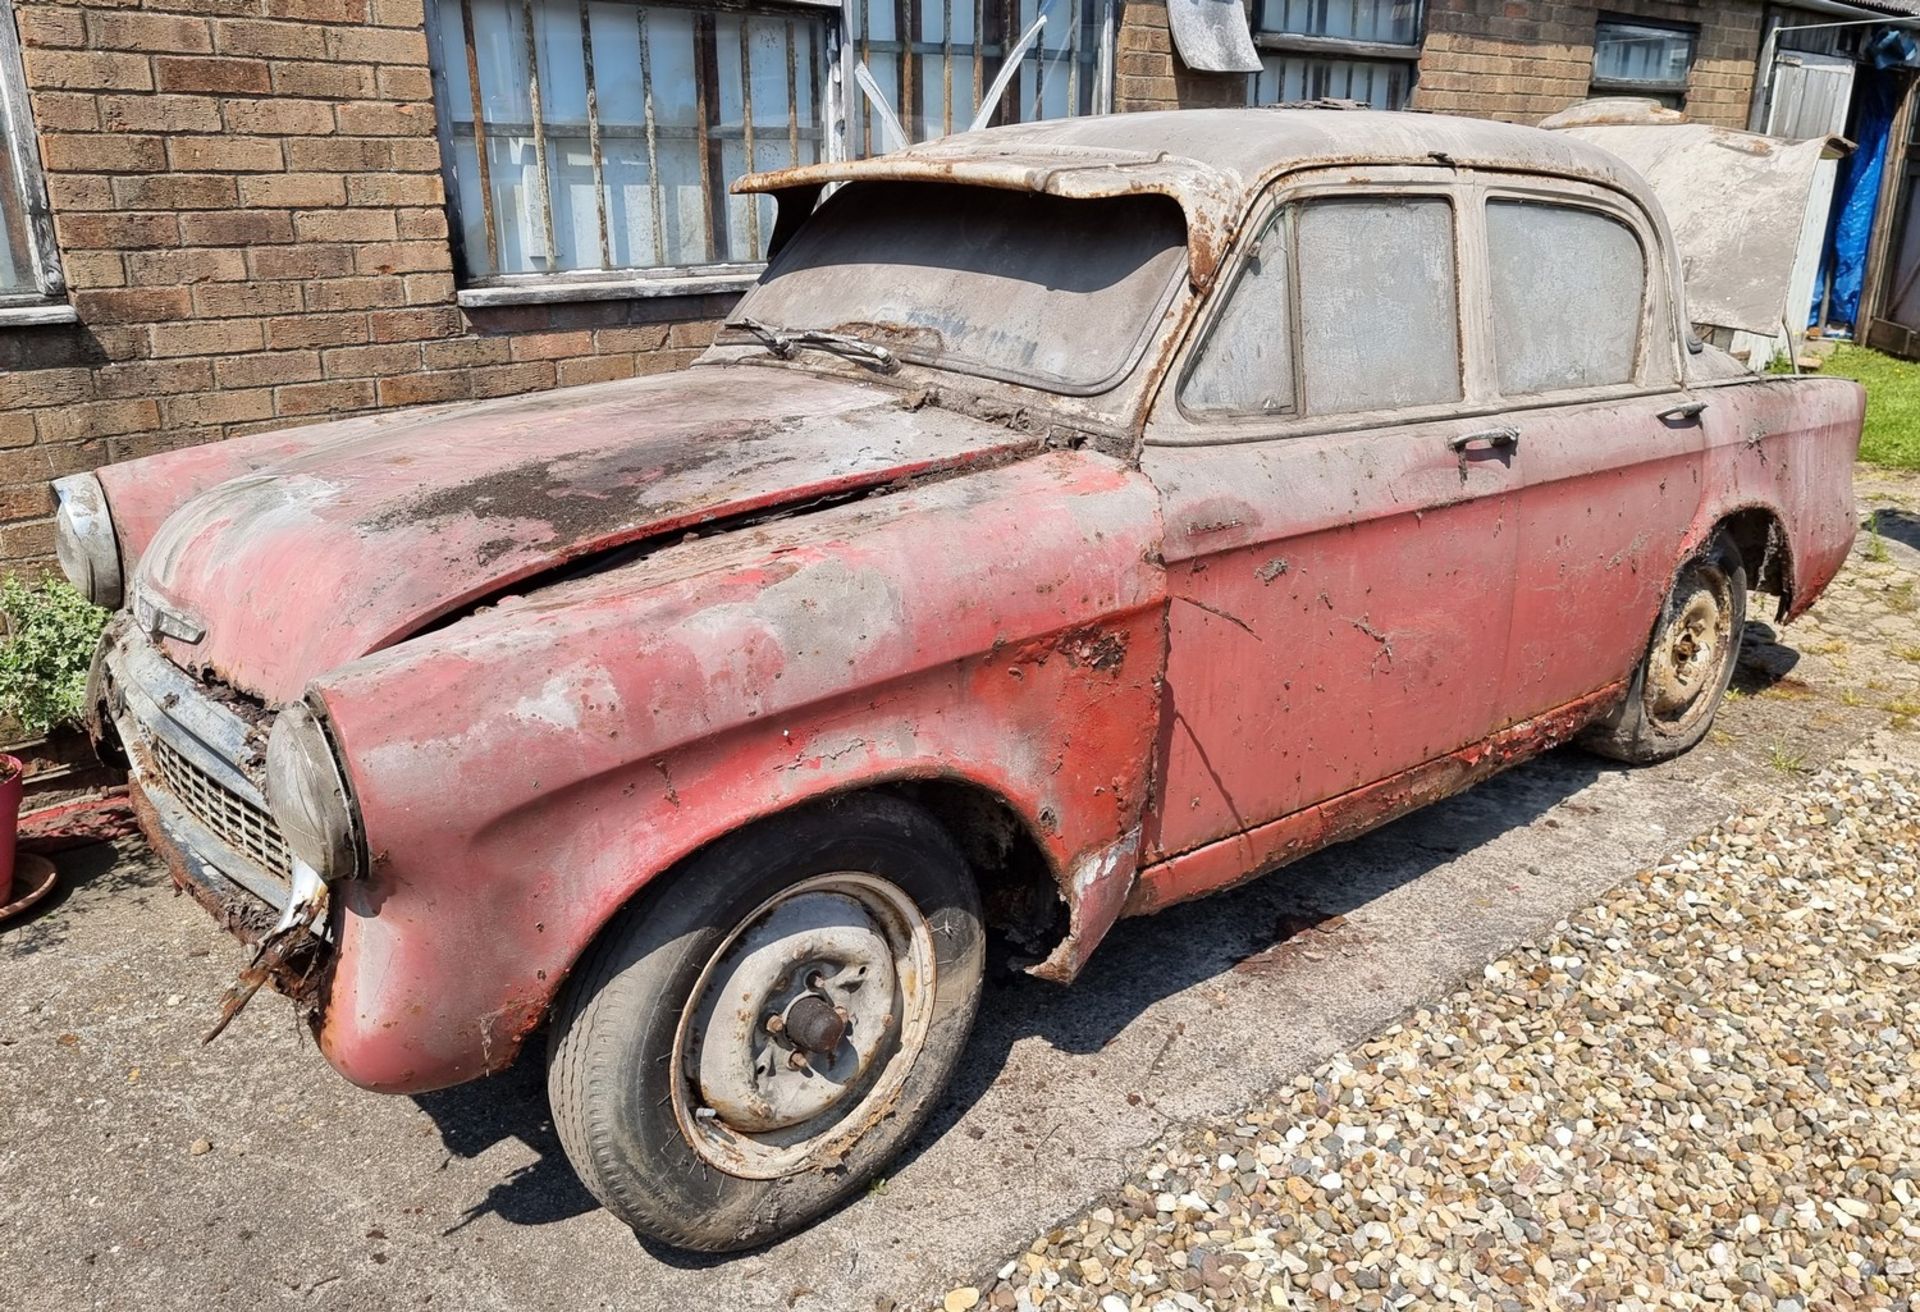 1958 Hillman Minx Series II Project, 1390cc. Registration number HXG 46. Chassis number A1821010H.